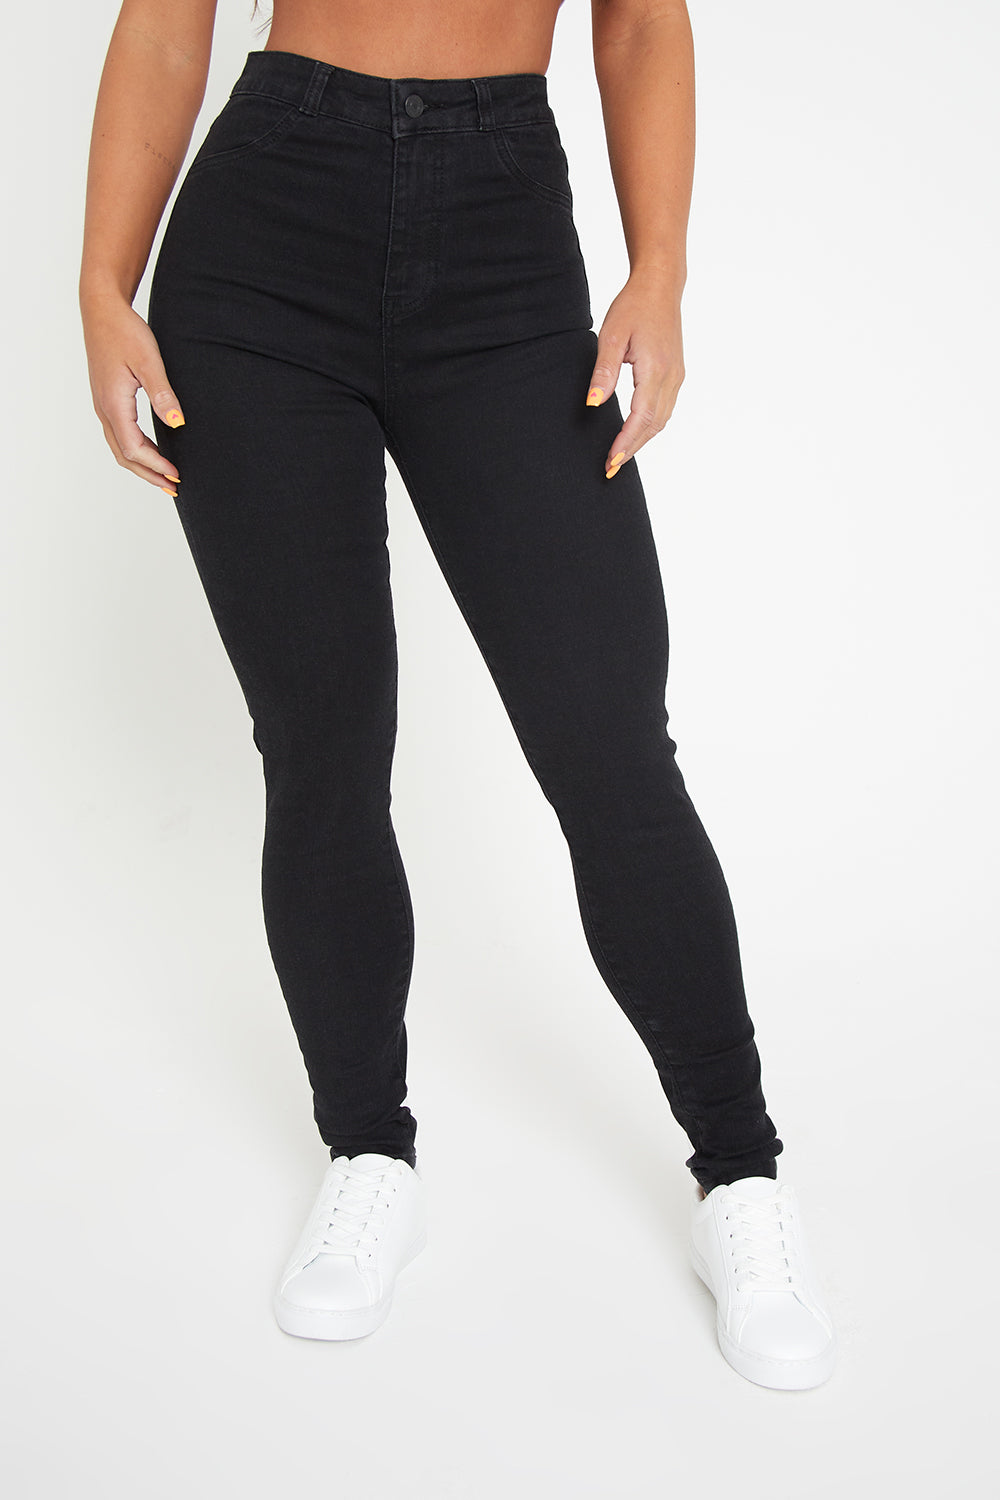 Buy High Waist Pants Online in India at Best Rates | Myntra